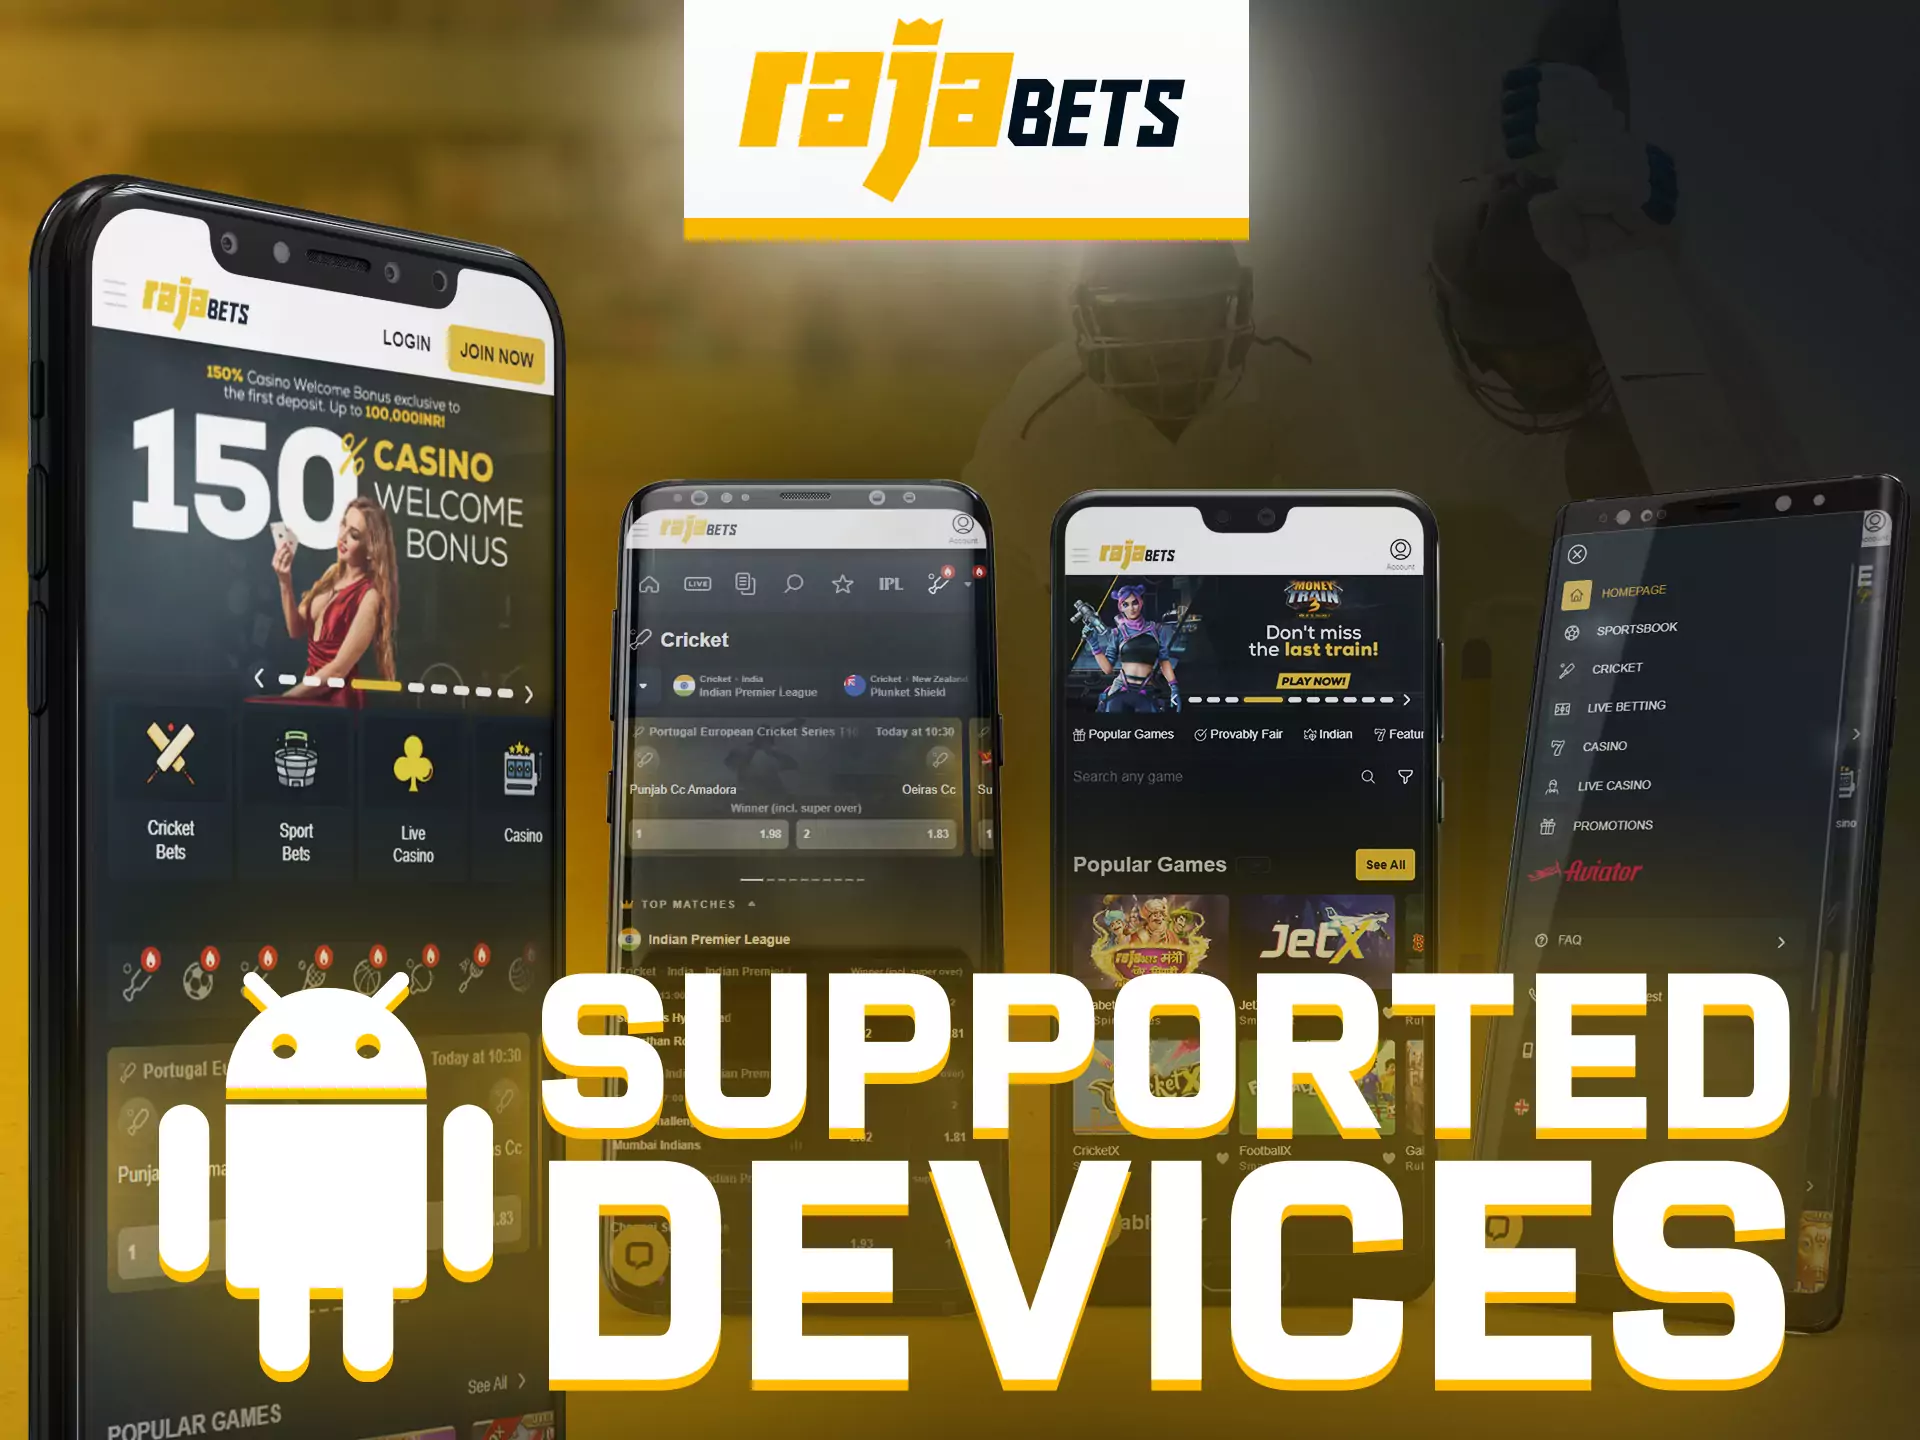 Rajabets app is supported on various iOS devices.